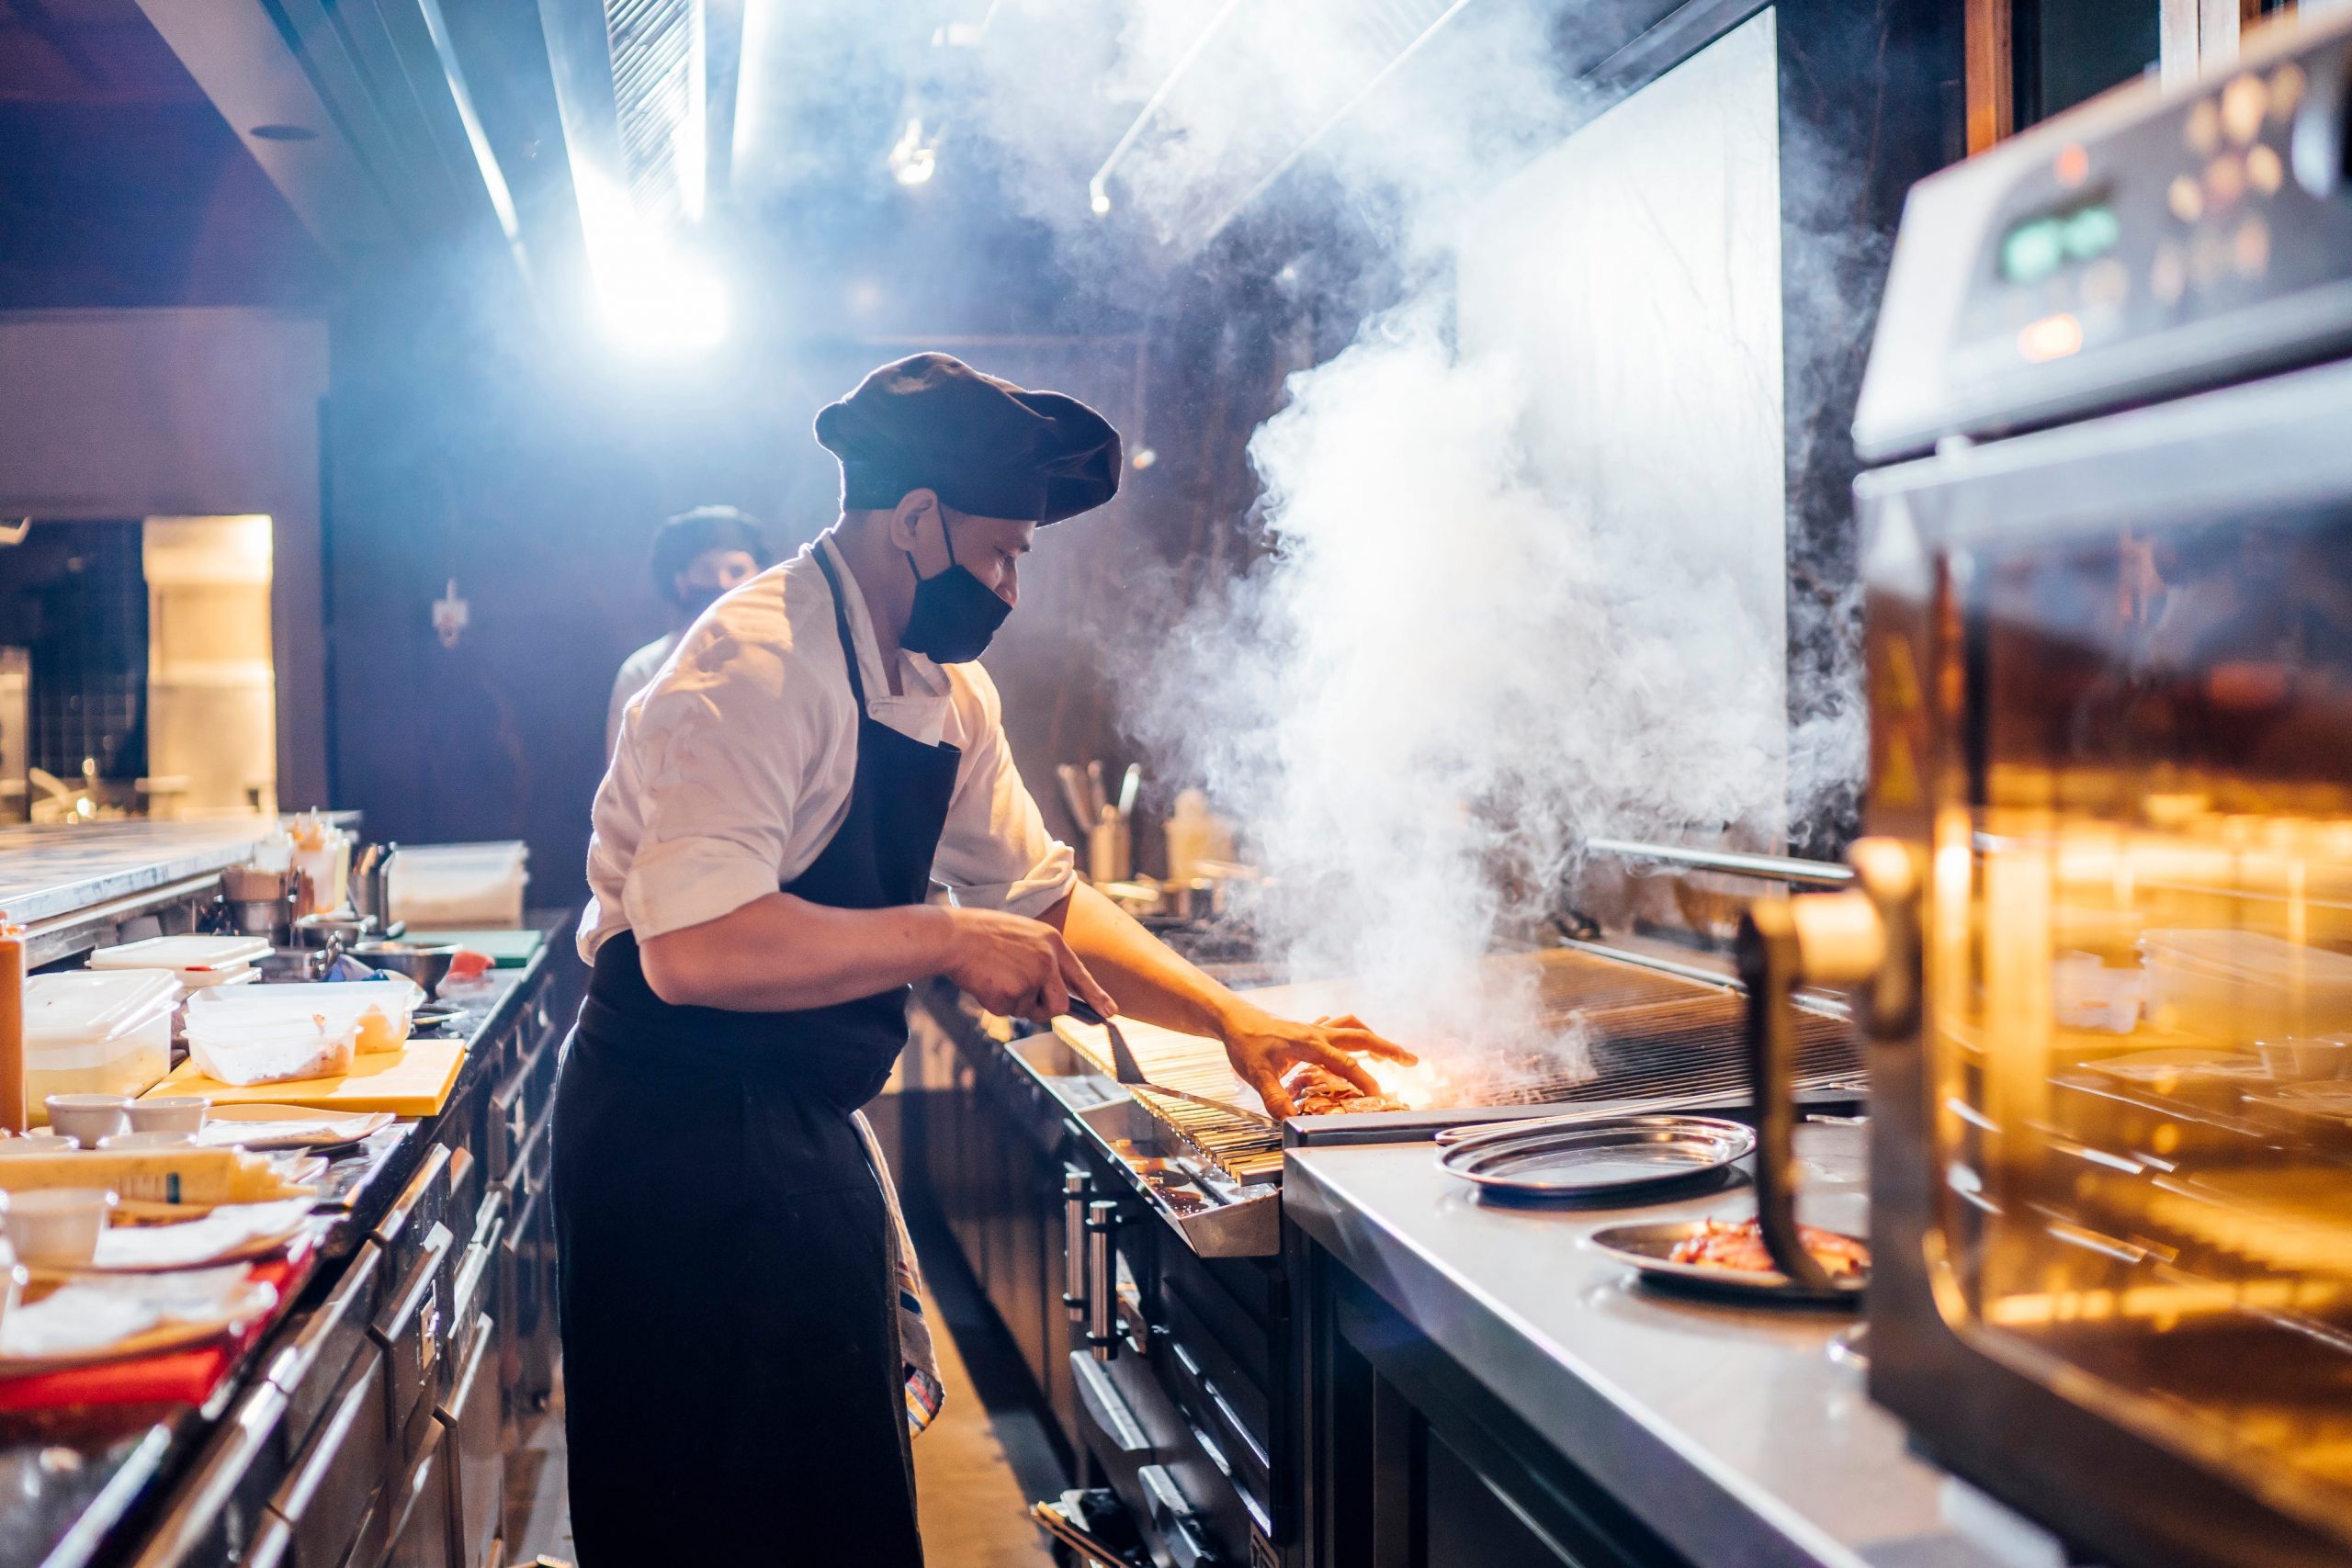 Chef wearing protective face mask preparing a dish in restaurant kitchen